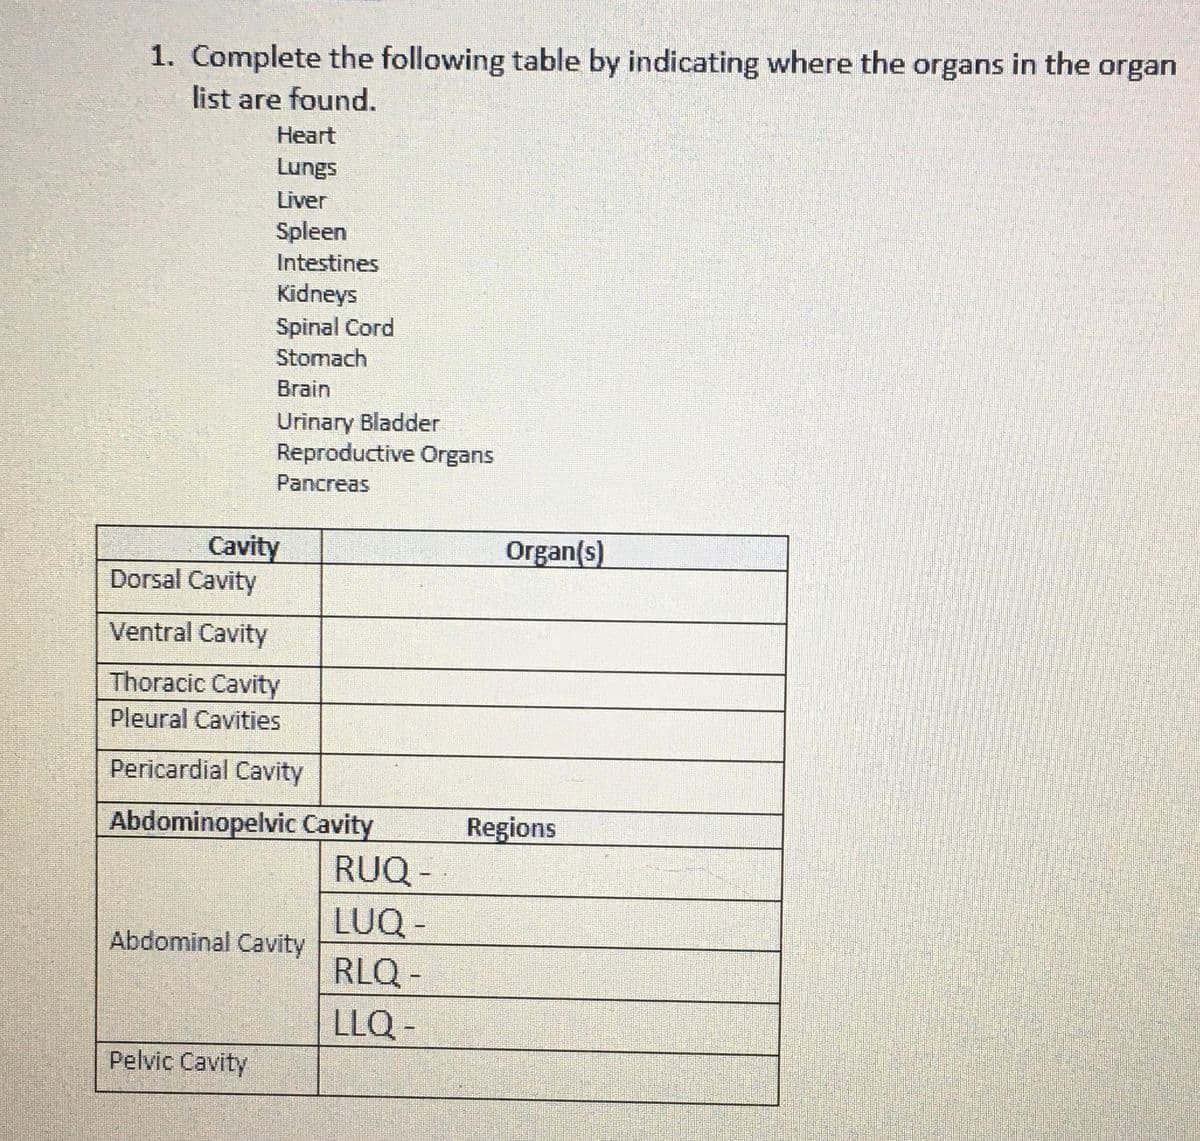 1. Complete the following table by indicating where the organs in the organ
list are found.
Heart
Lungs
Liver
Spleen
Intestines
Kidneys
Spinal Cord
Stomach
Brain
Urinary Bladder
Reproductive Organs
Pancreas
Cavity
Dorsal Cavity
Ventral Cavity
Thoracic Cavity
Pleural Cavities
Pericardial Cavity
Pelvic Cavity
Abdominopelvic Cavity
Abdominal Cavity
RUQ -
LUQ -
RLQ-
LLQ-
Organ(s)
Regions